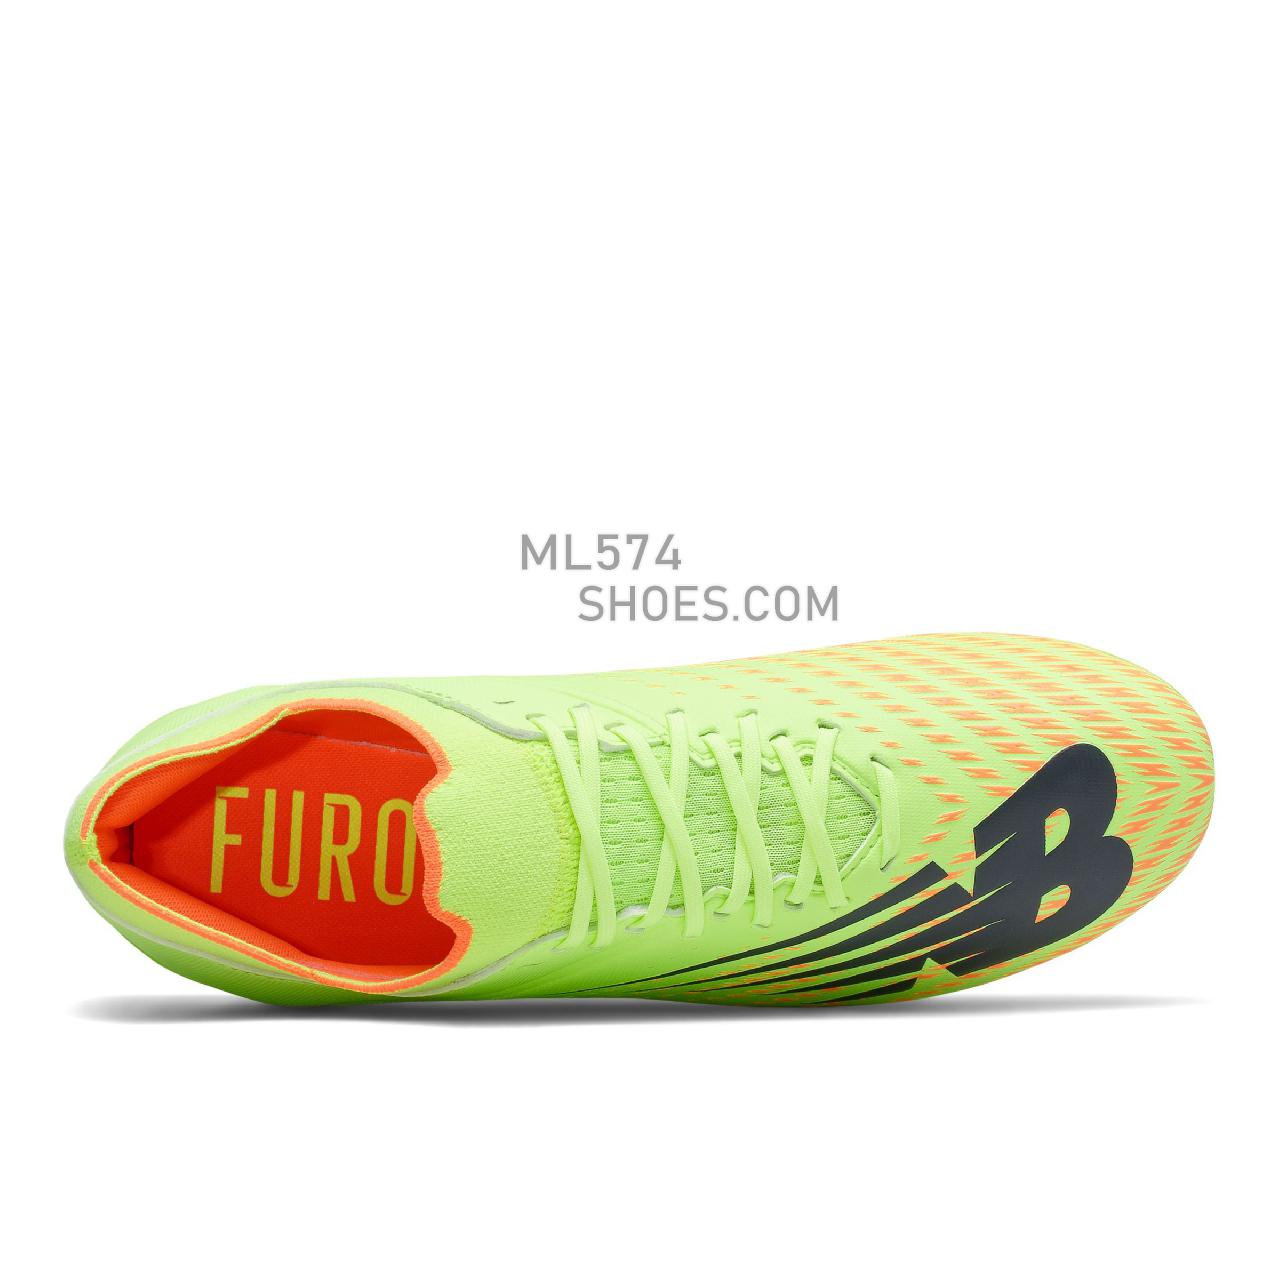 New Balance Furon v6+ Dispatch FG - Men's Soccer - Bleached Lime Glo with Citrus Punch - MSF3FS65